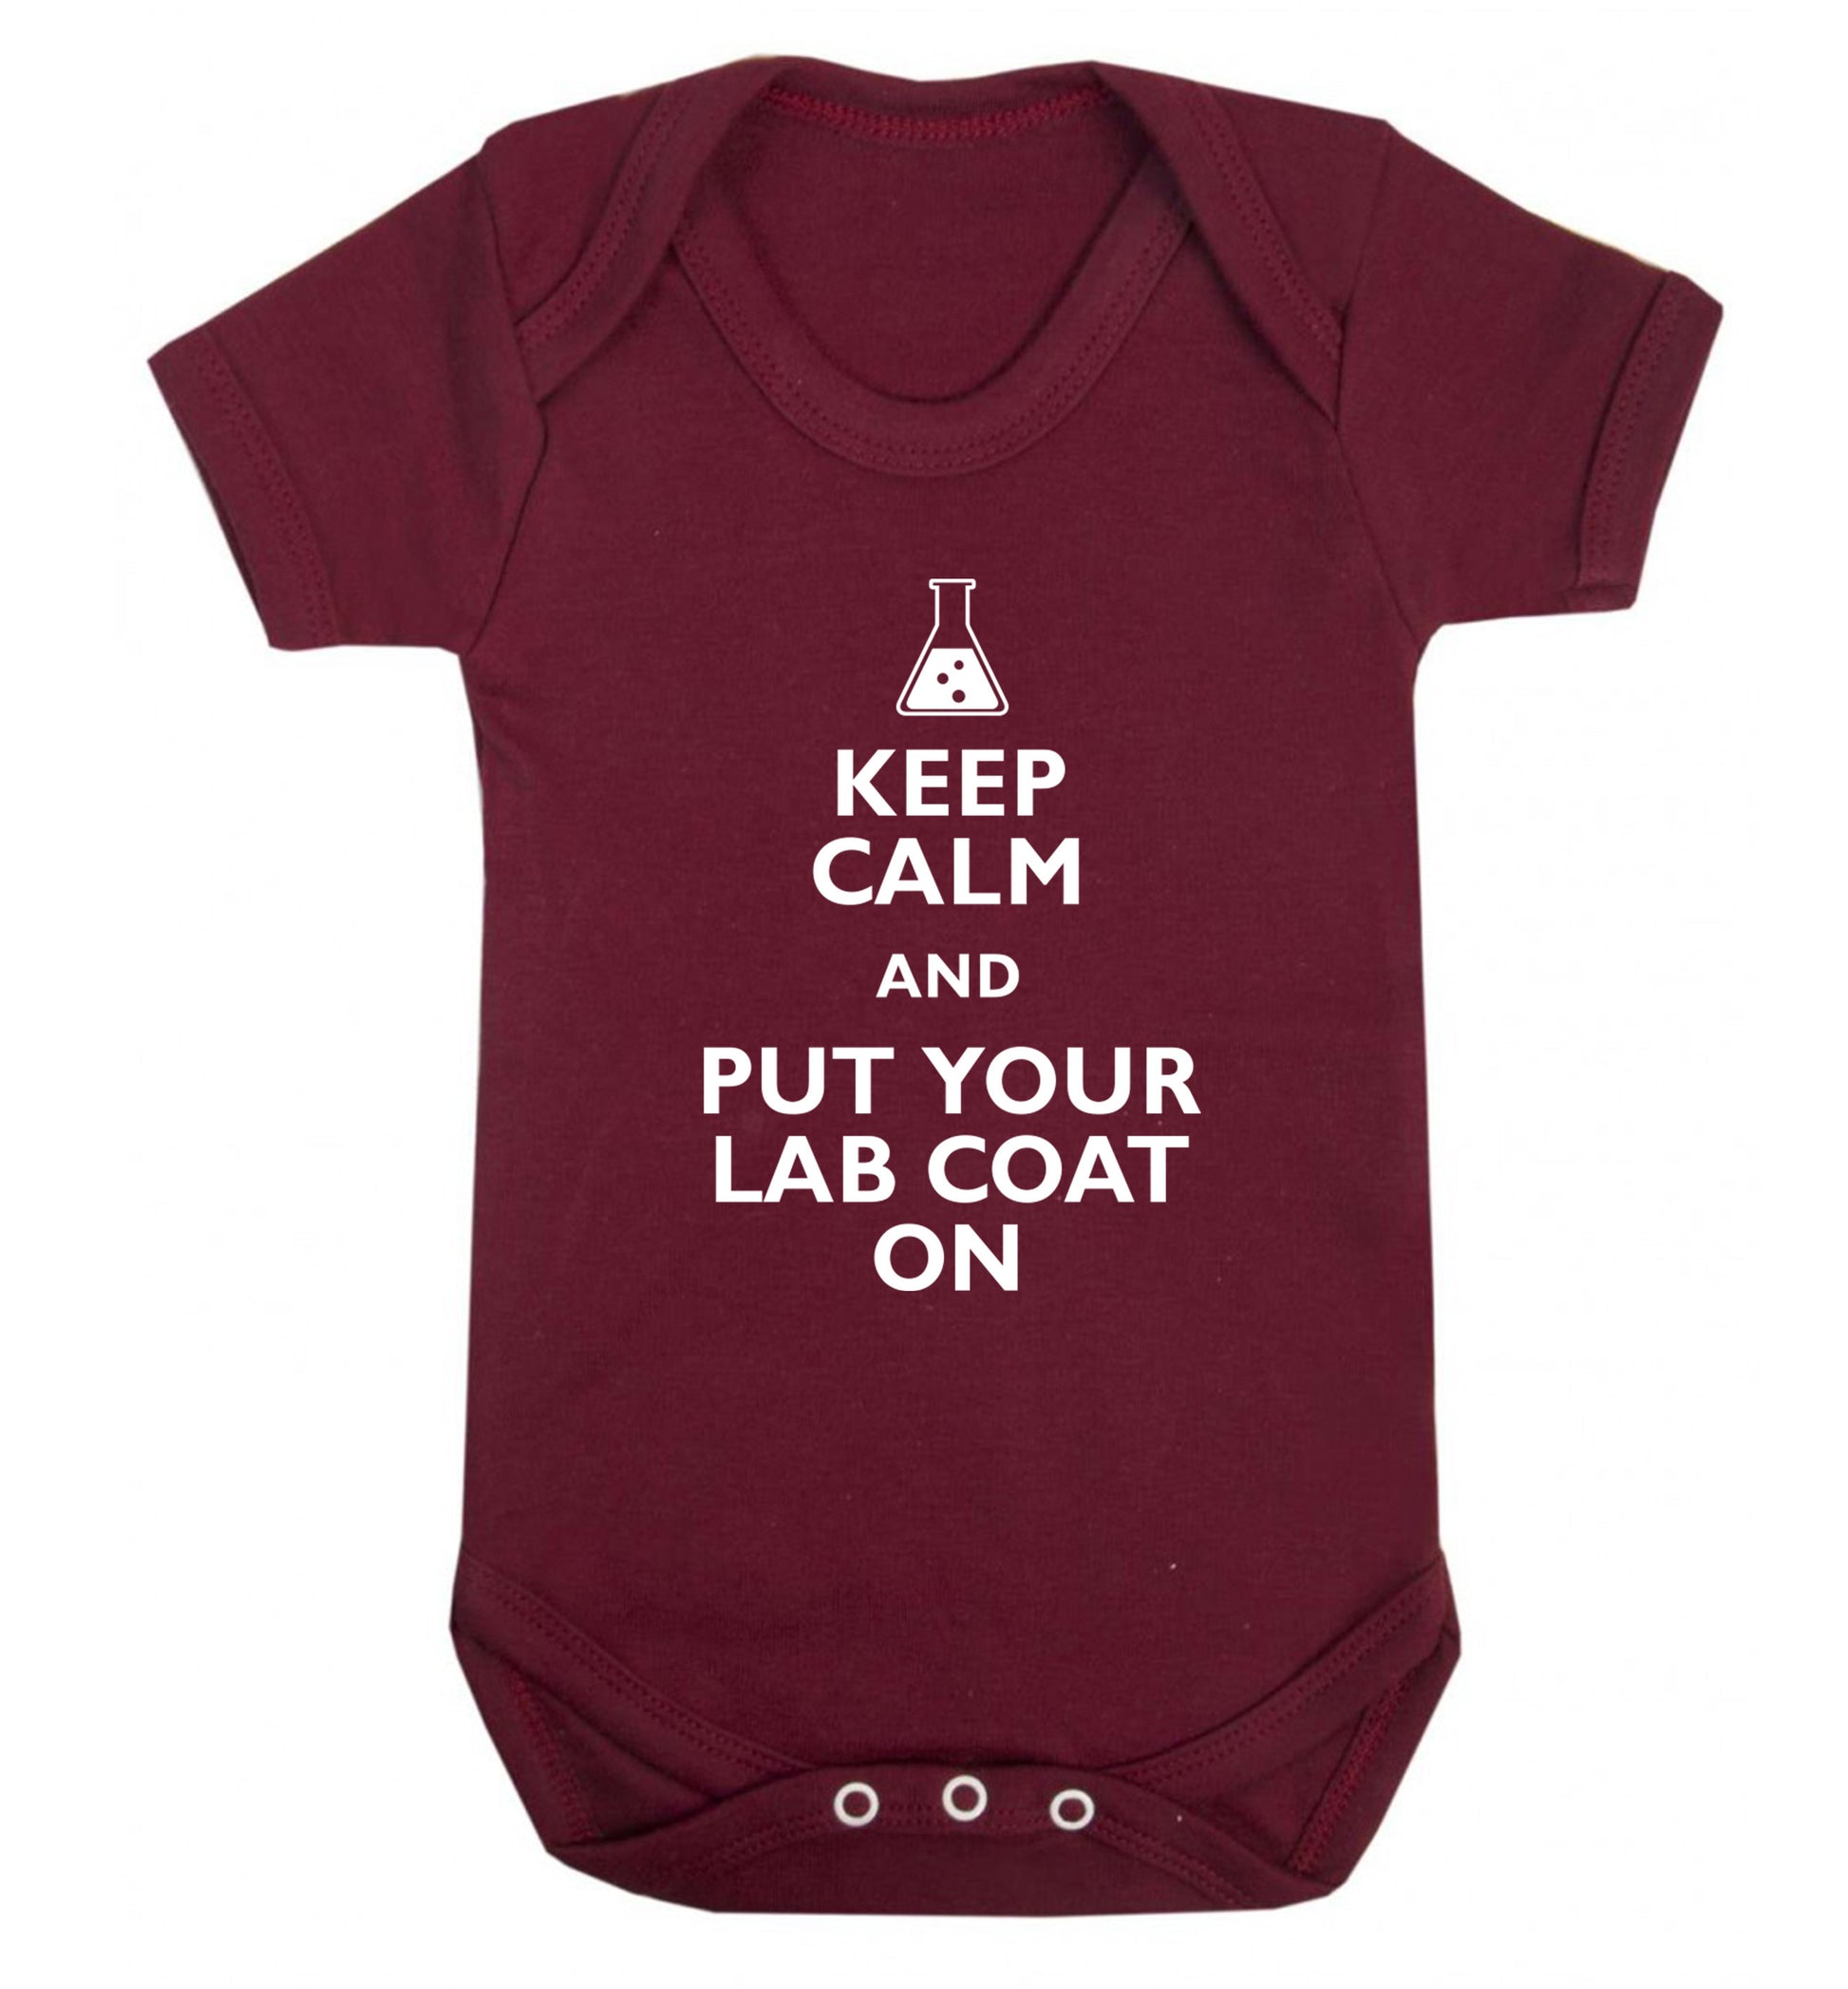 Keep calm and put your lab coat on Baby Vest maroon 18-24 months